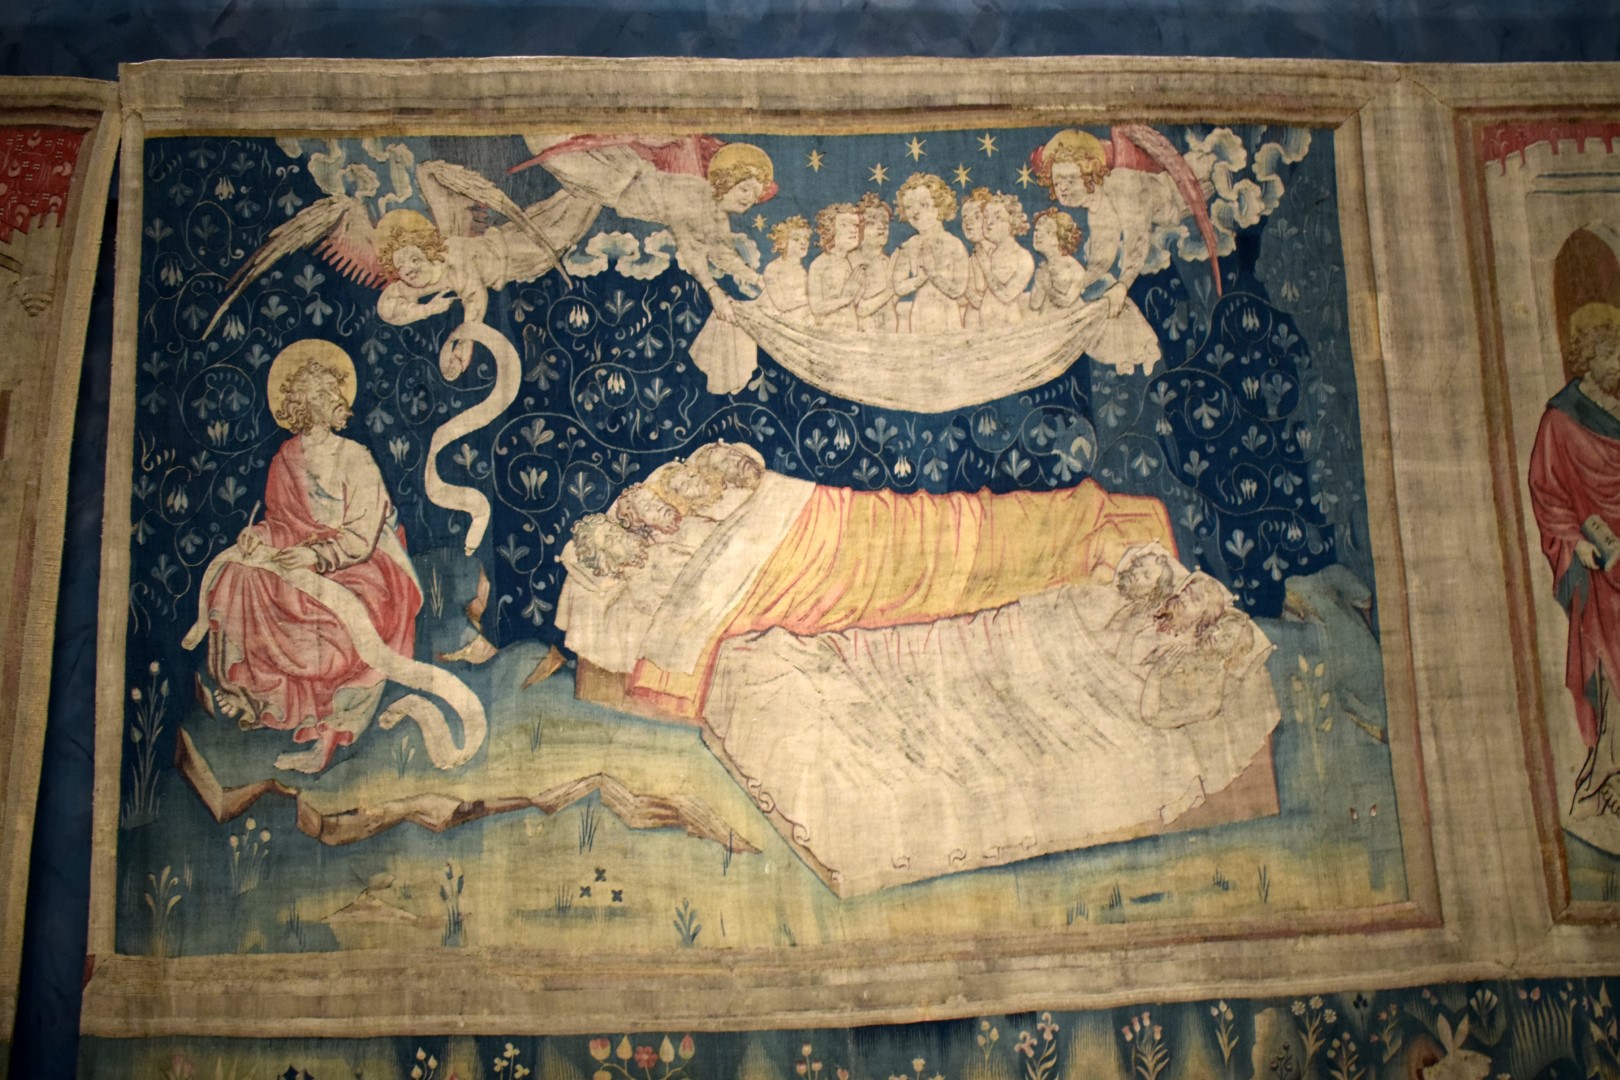 The Apocalypse Tapestry, Château d'Angers